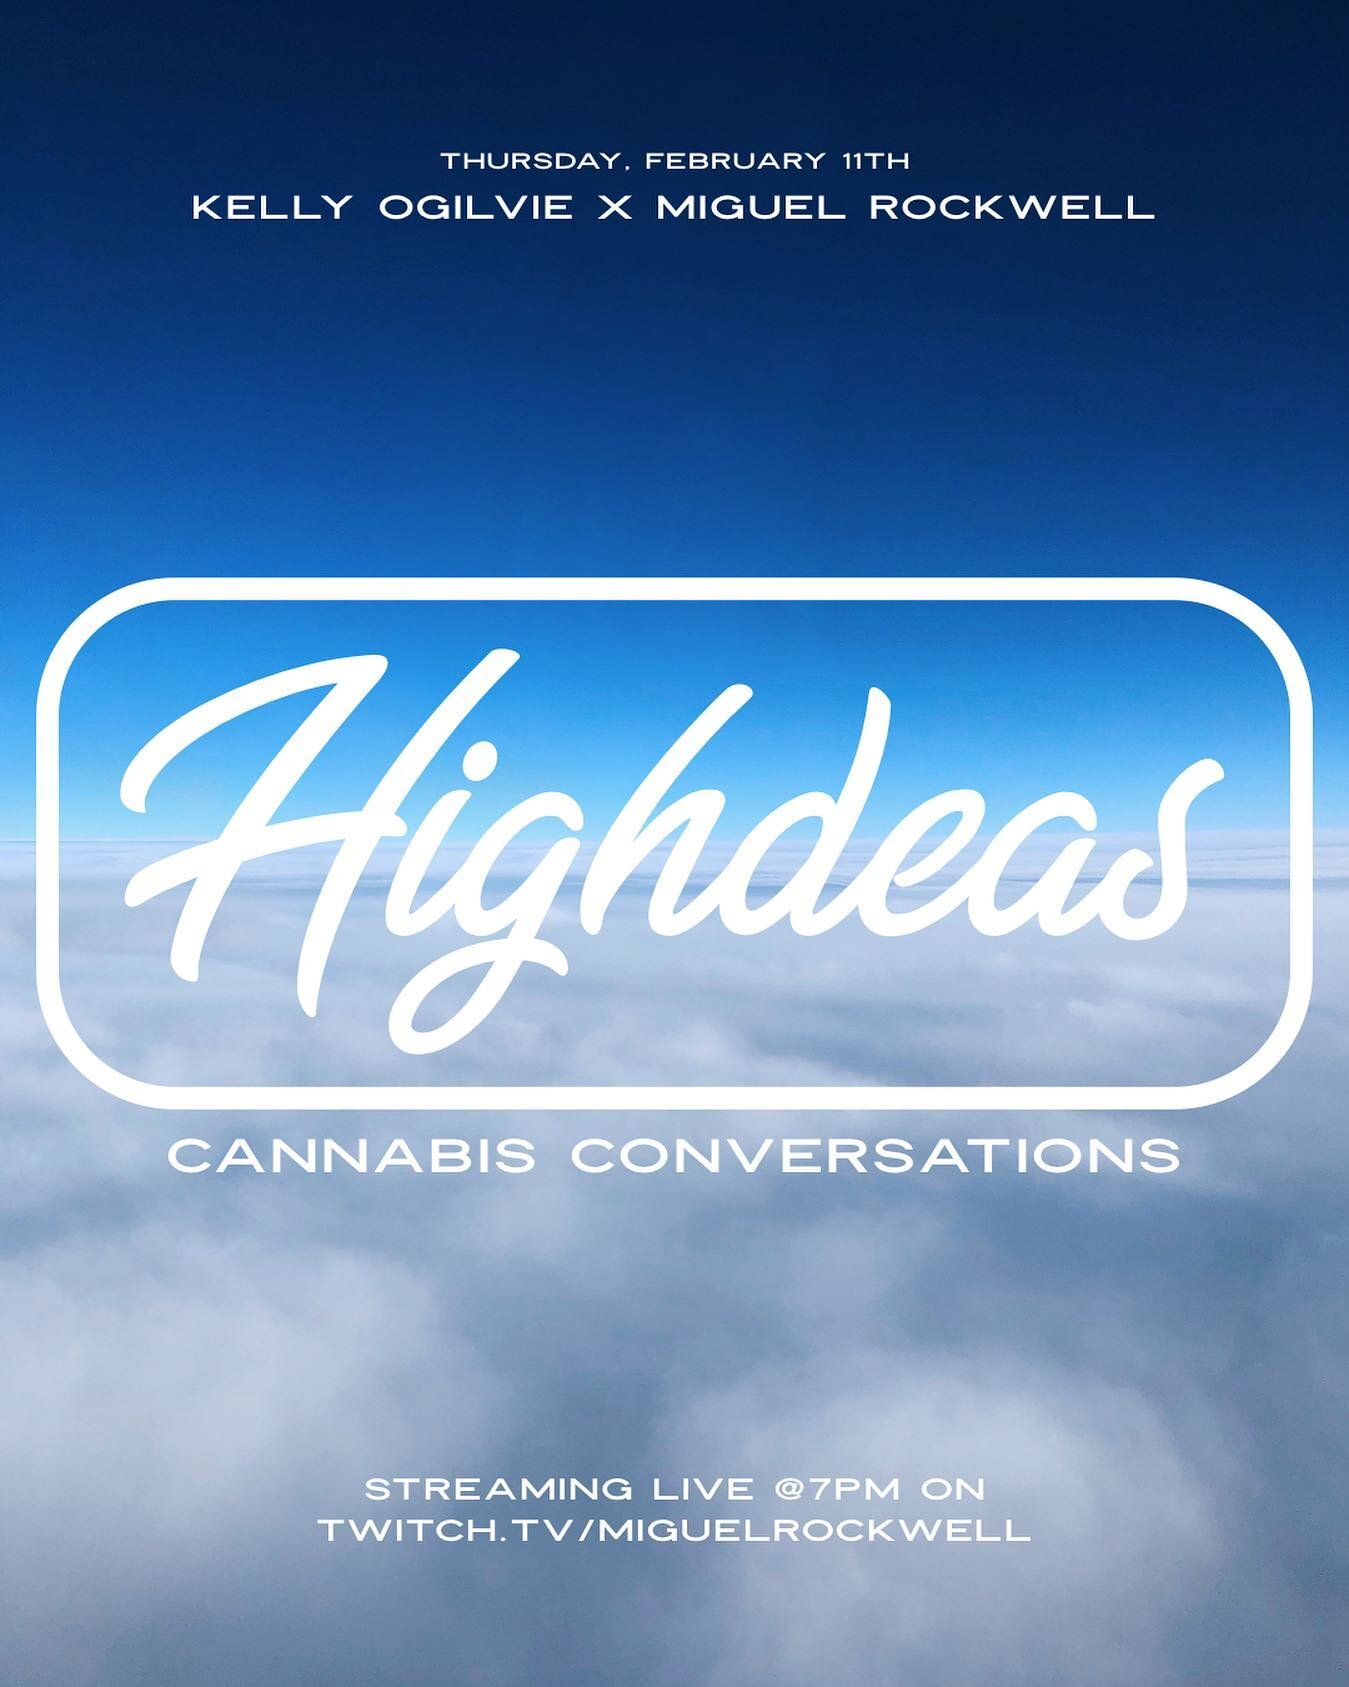 NEW SHOW ALERT!!! 🚨 Tonight Thursday 2/11/21 @digikelly &amp; @miguelrockwell explore #HIGHDEAS. Come Thru for some Cannabis Conversations, Science and Laughs! Twitch.tv/miguelrockwell